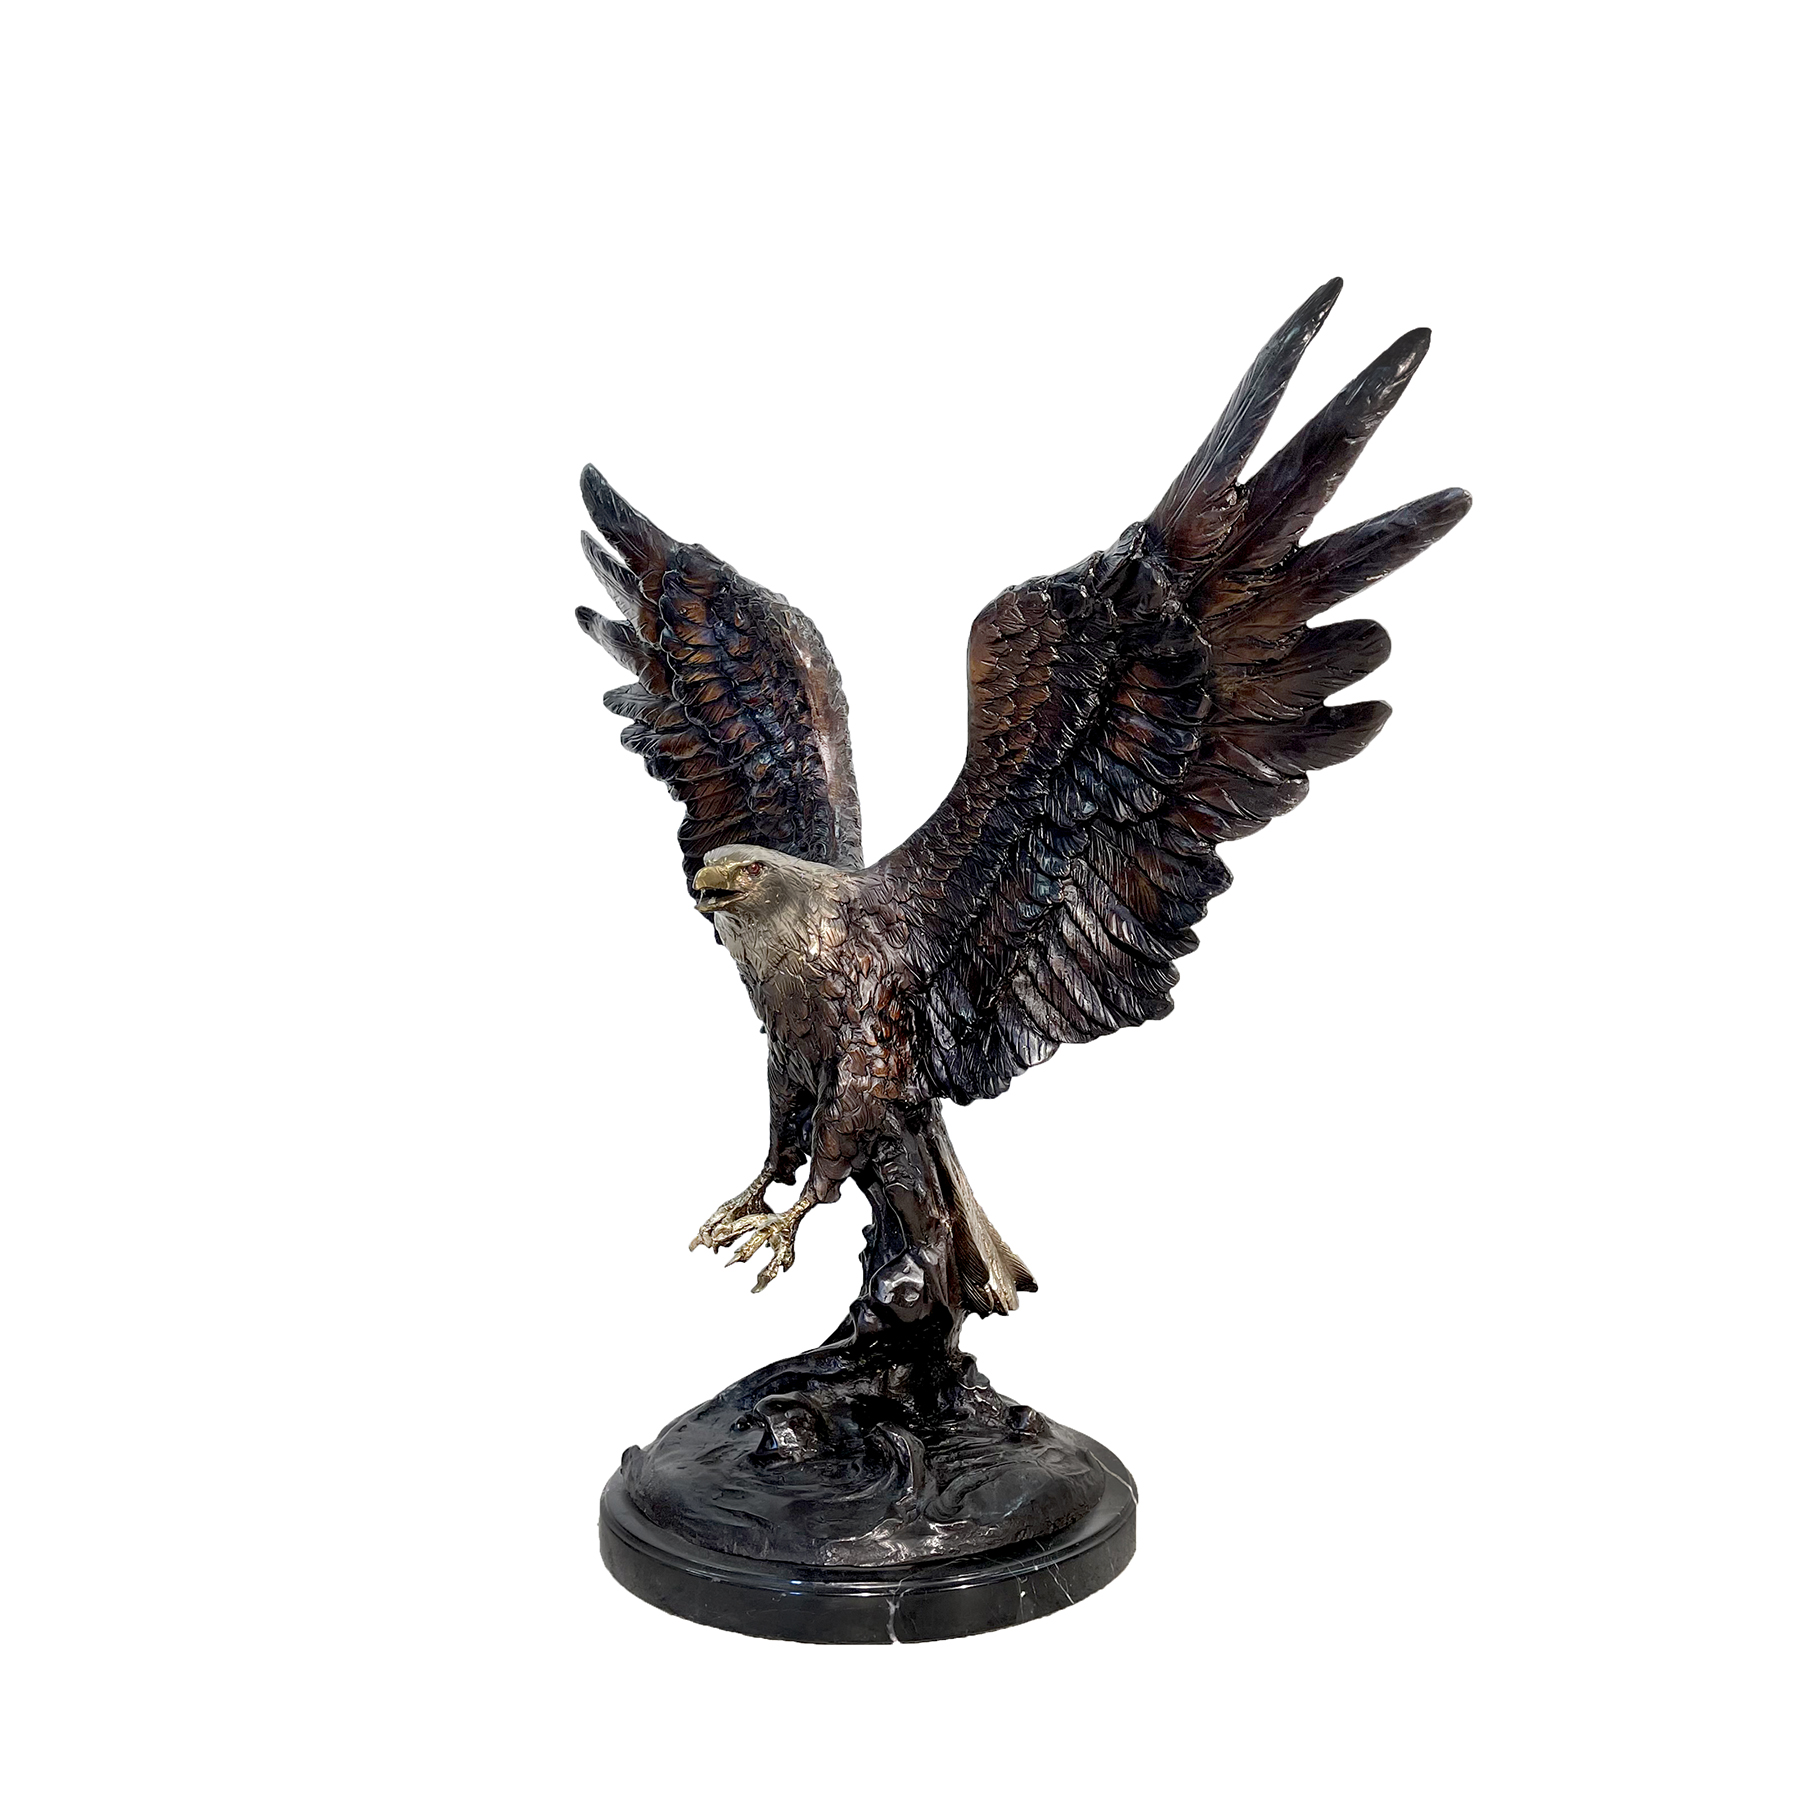 SRB056759 Bronze Flying Eagle Table-top Sculpture on Marble Base by Metropolitan Galleries Inc.